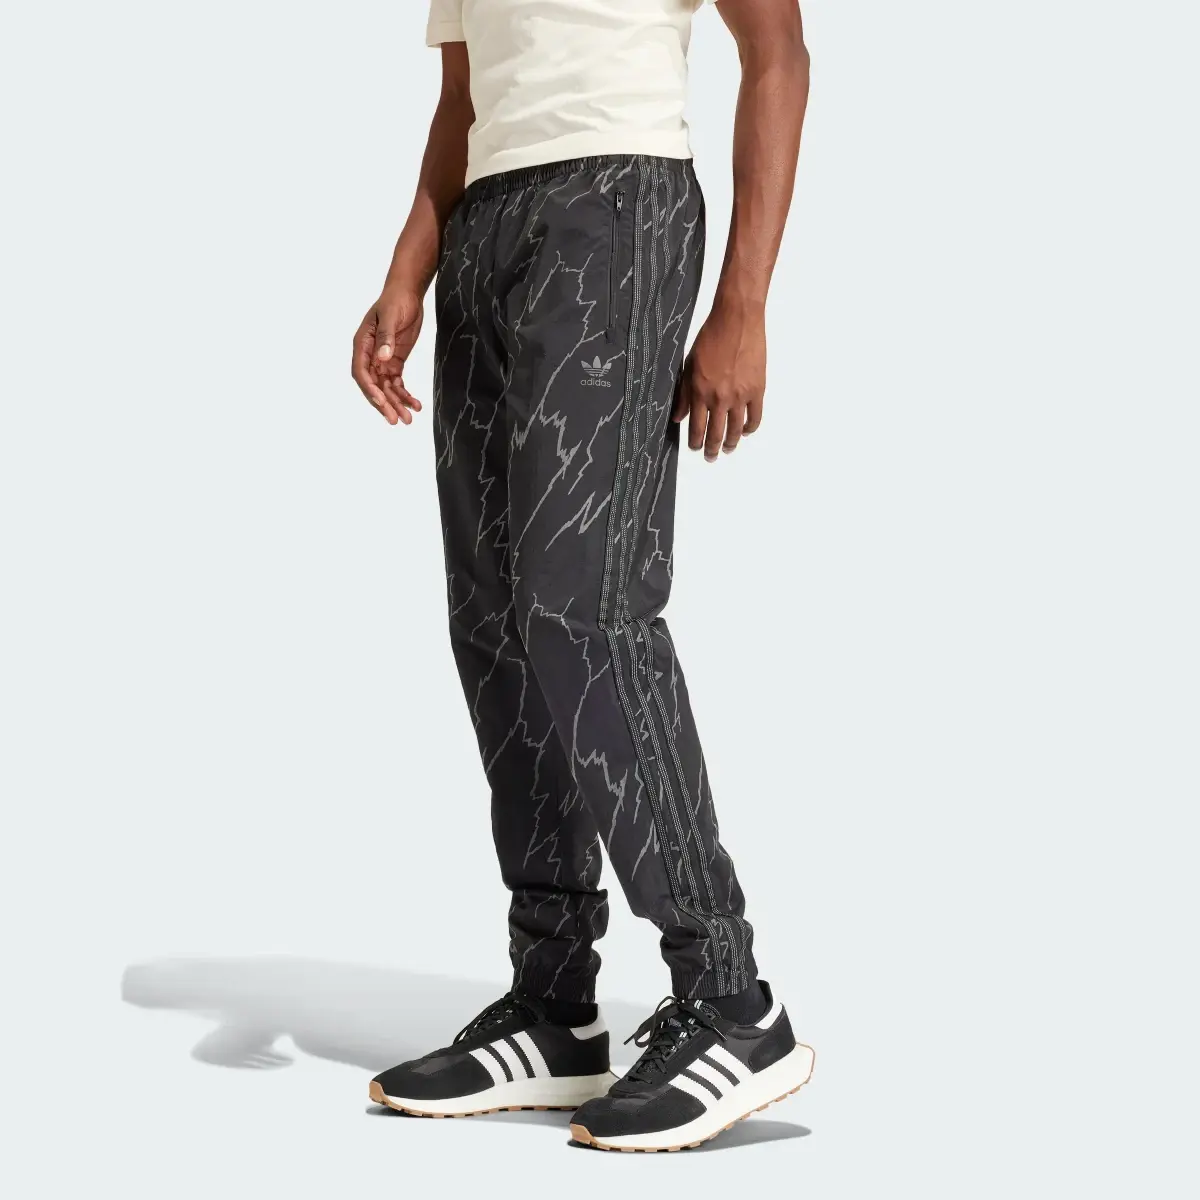 Adidas Allover Print SST Track Tracksuit Bottoms. 2